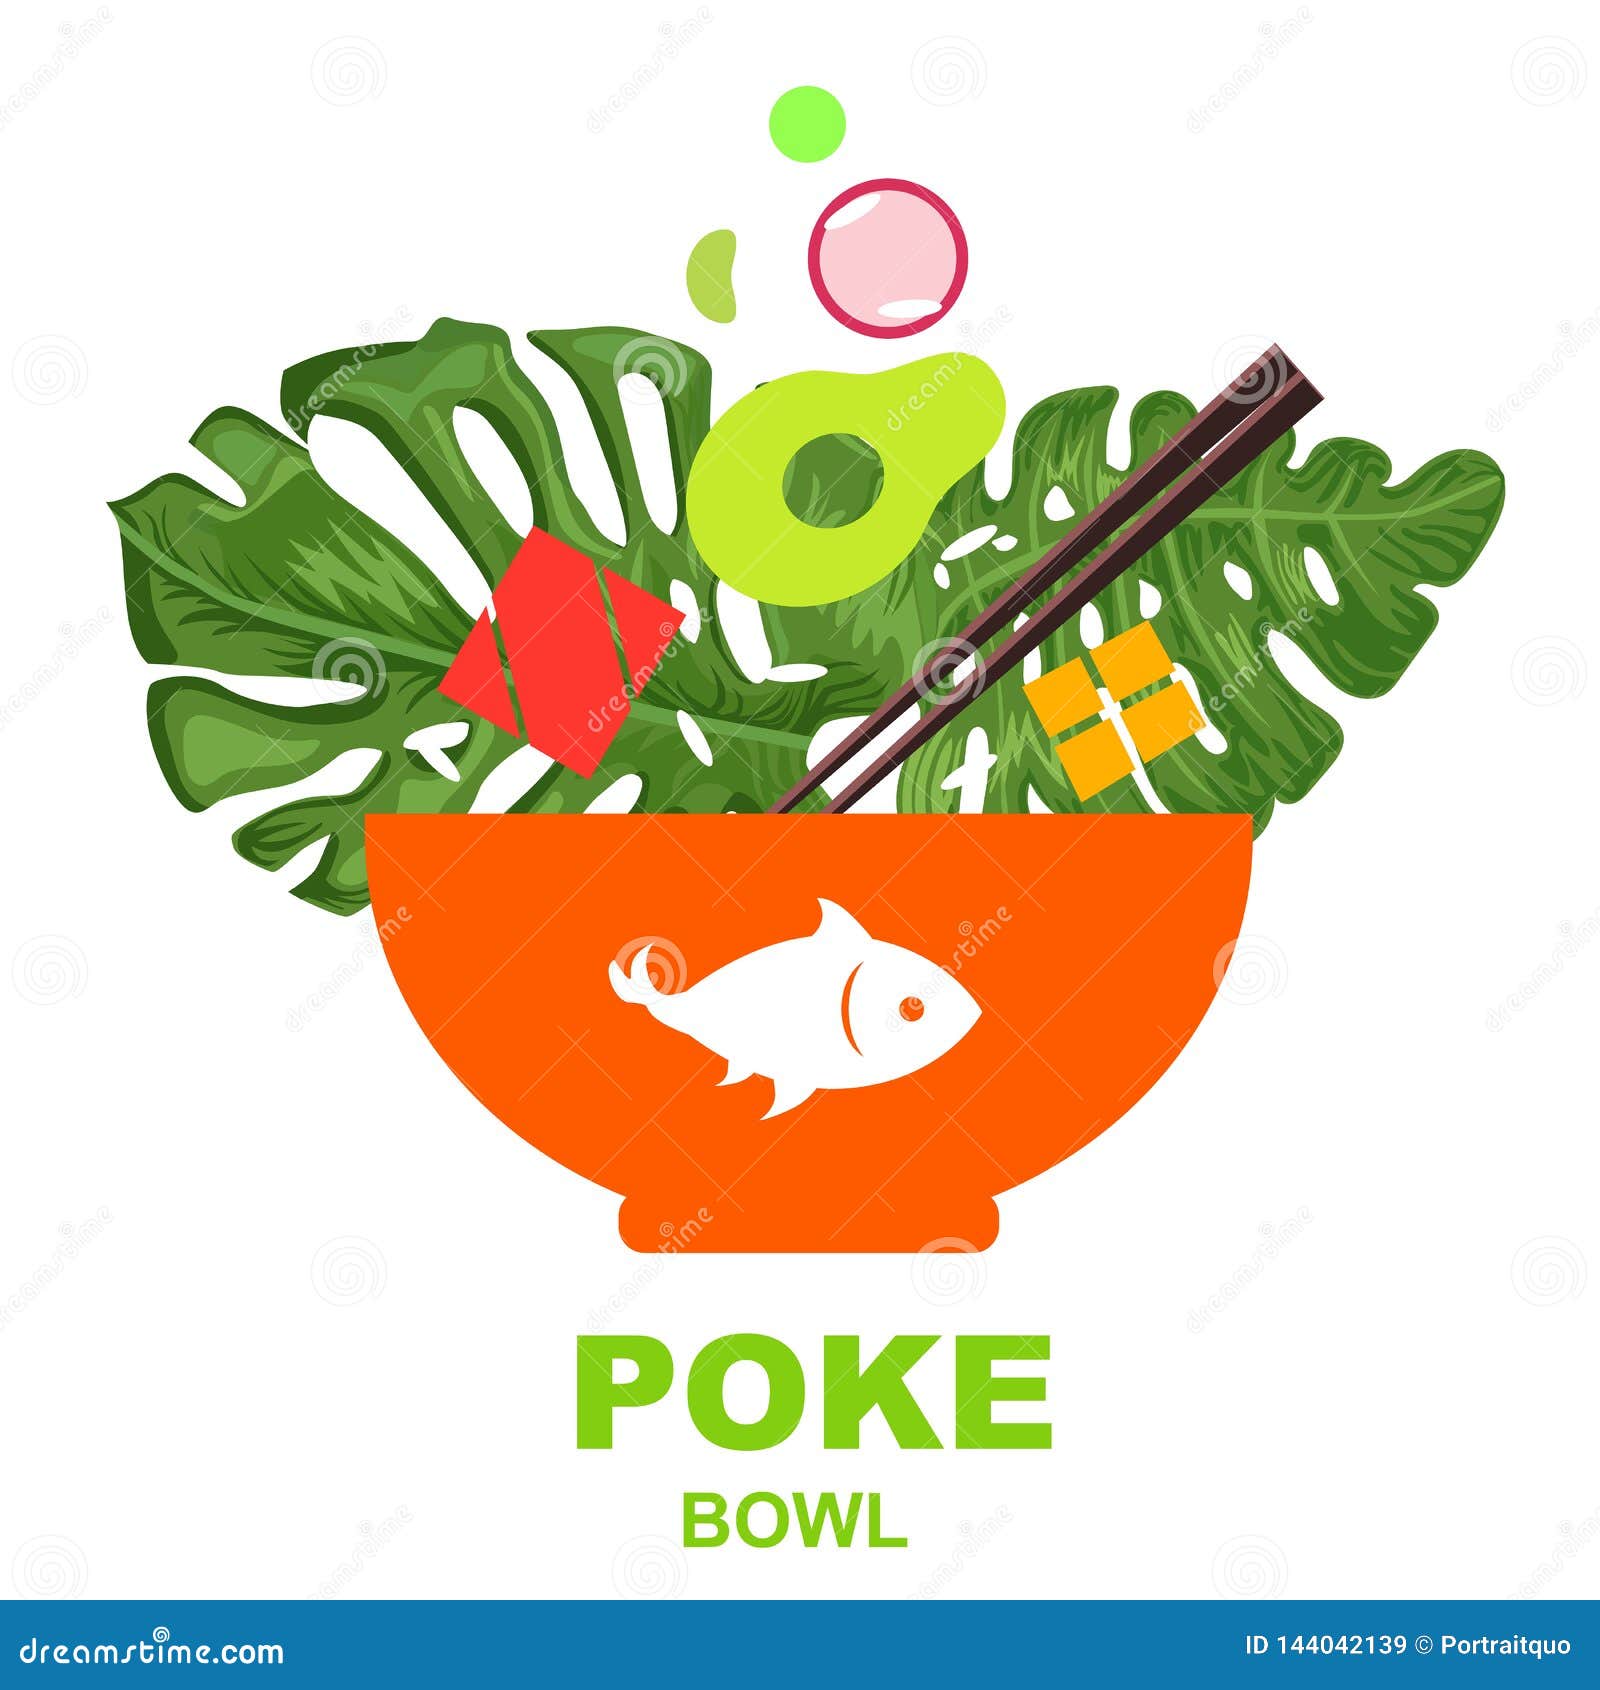 https://thumbs.dreamstime.com/z/healthy-food-poke-bowl-palm-leaves-white-background-healthy-food-poke-bowl-palm-leaves-white-background-144042139.jpg